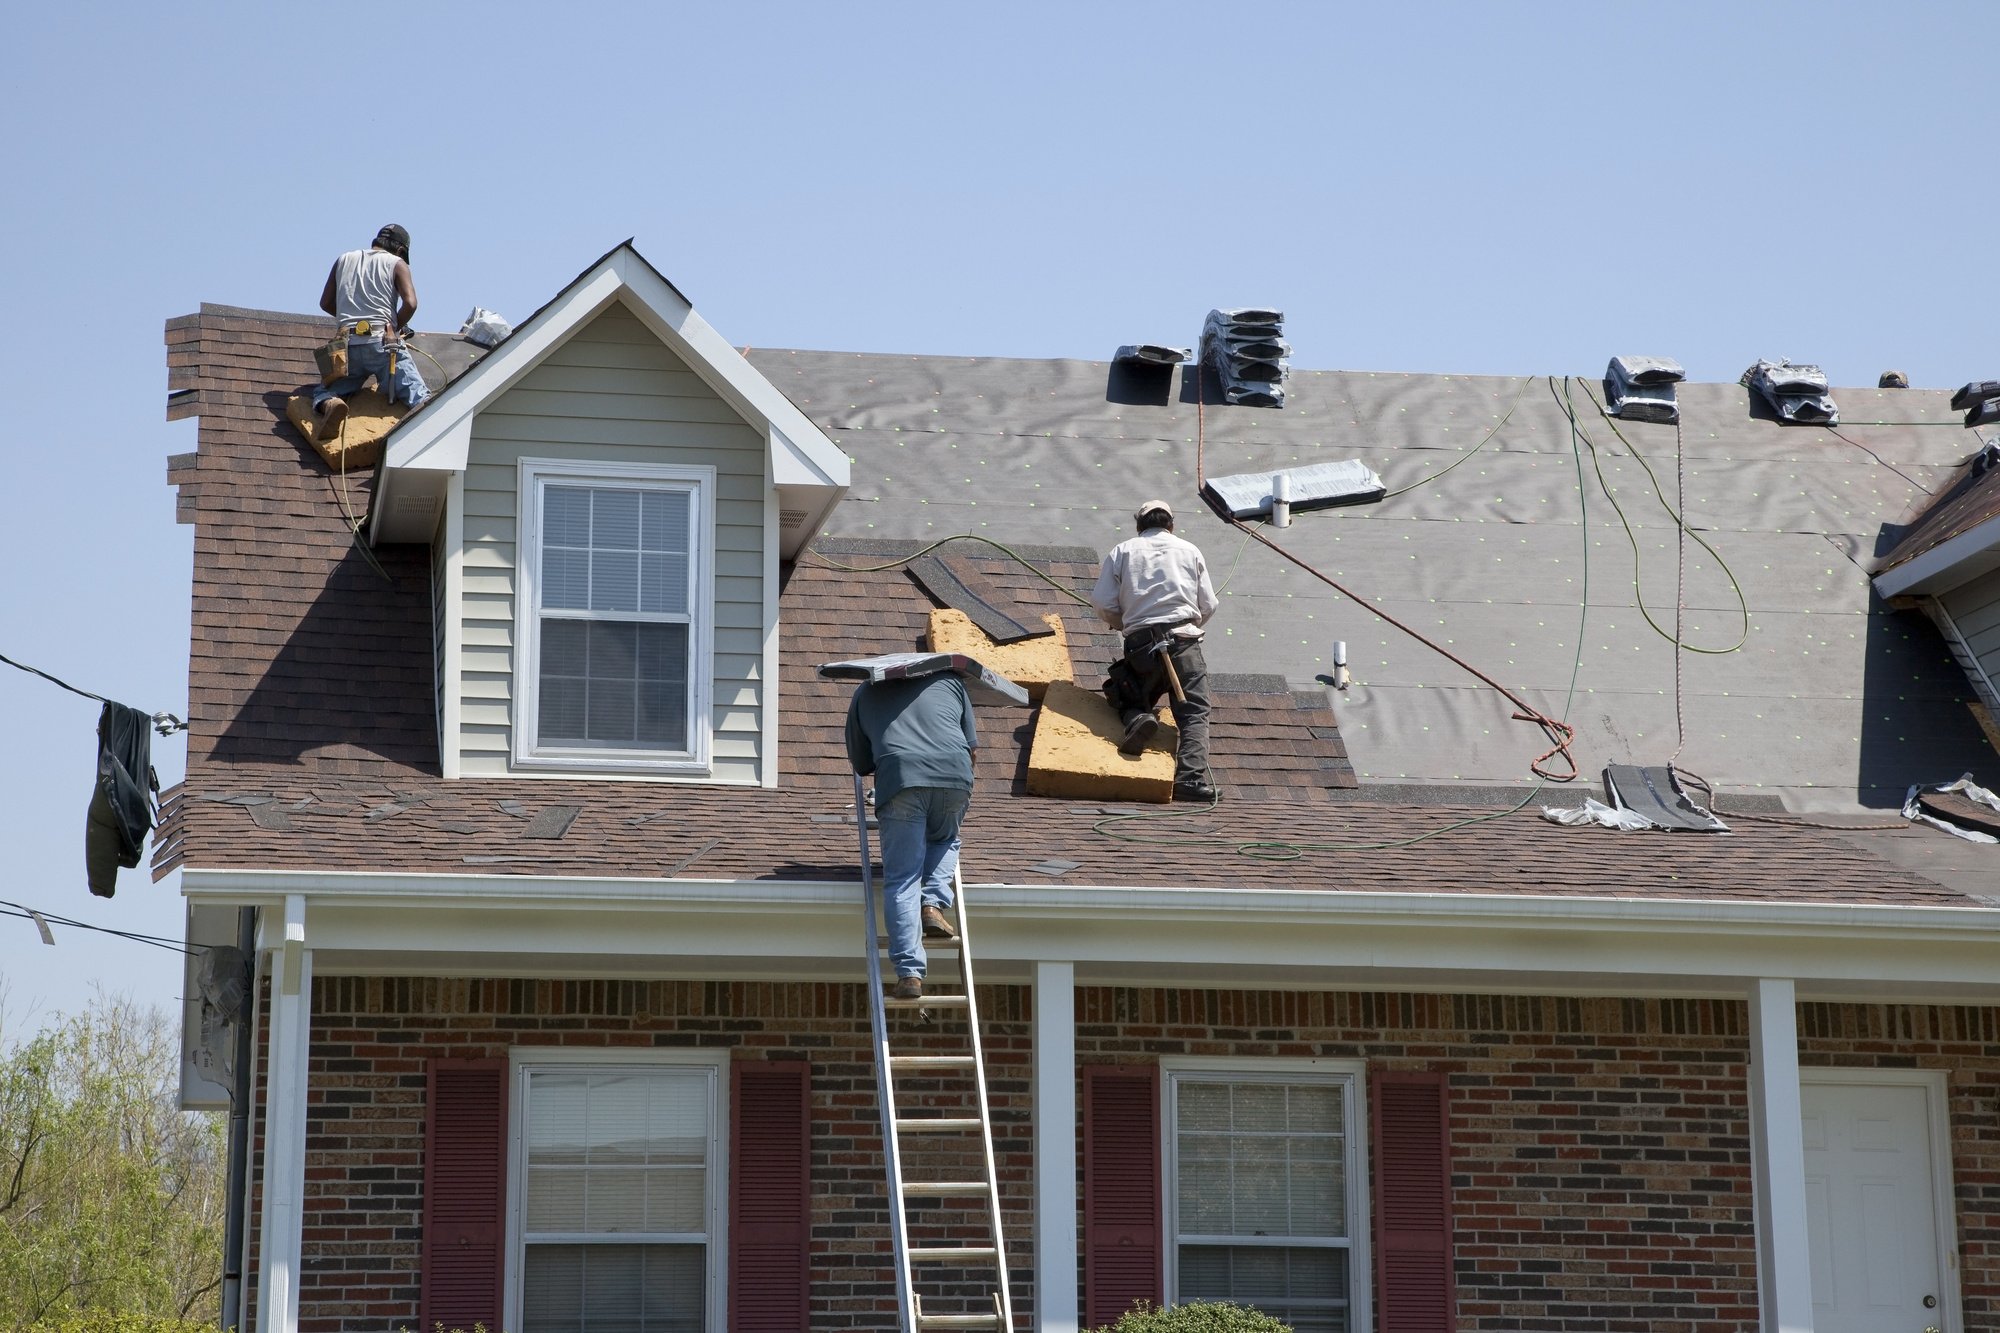 Don't let roofing issues compromise your safety and comfort, take proactive steps with residential roofing services to safeguard your investments.